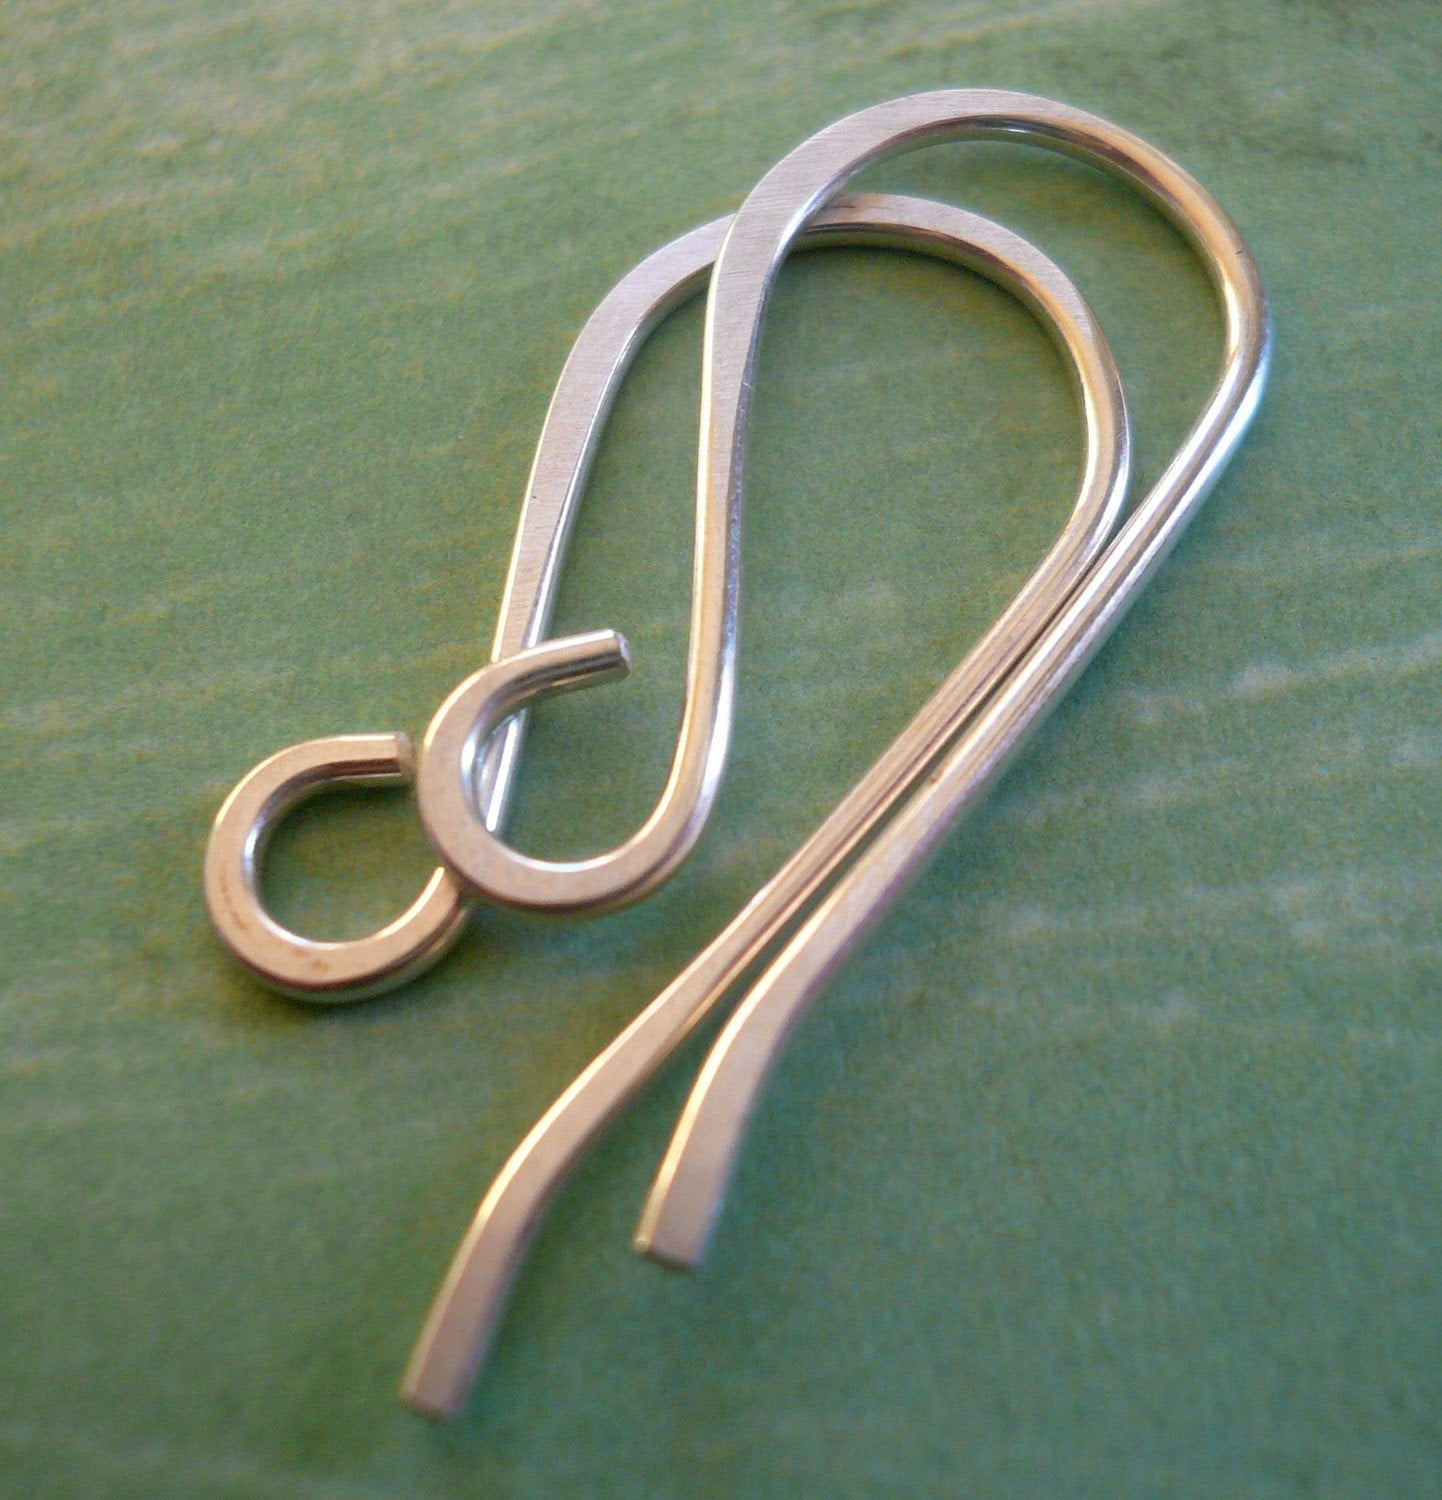 HEAVY 18 Gauge Solitaire Sterling Silver Earwires - Handmade. Hand forged